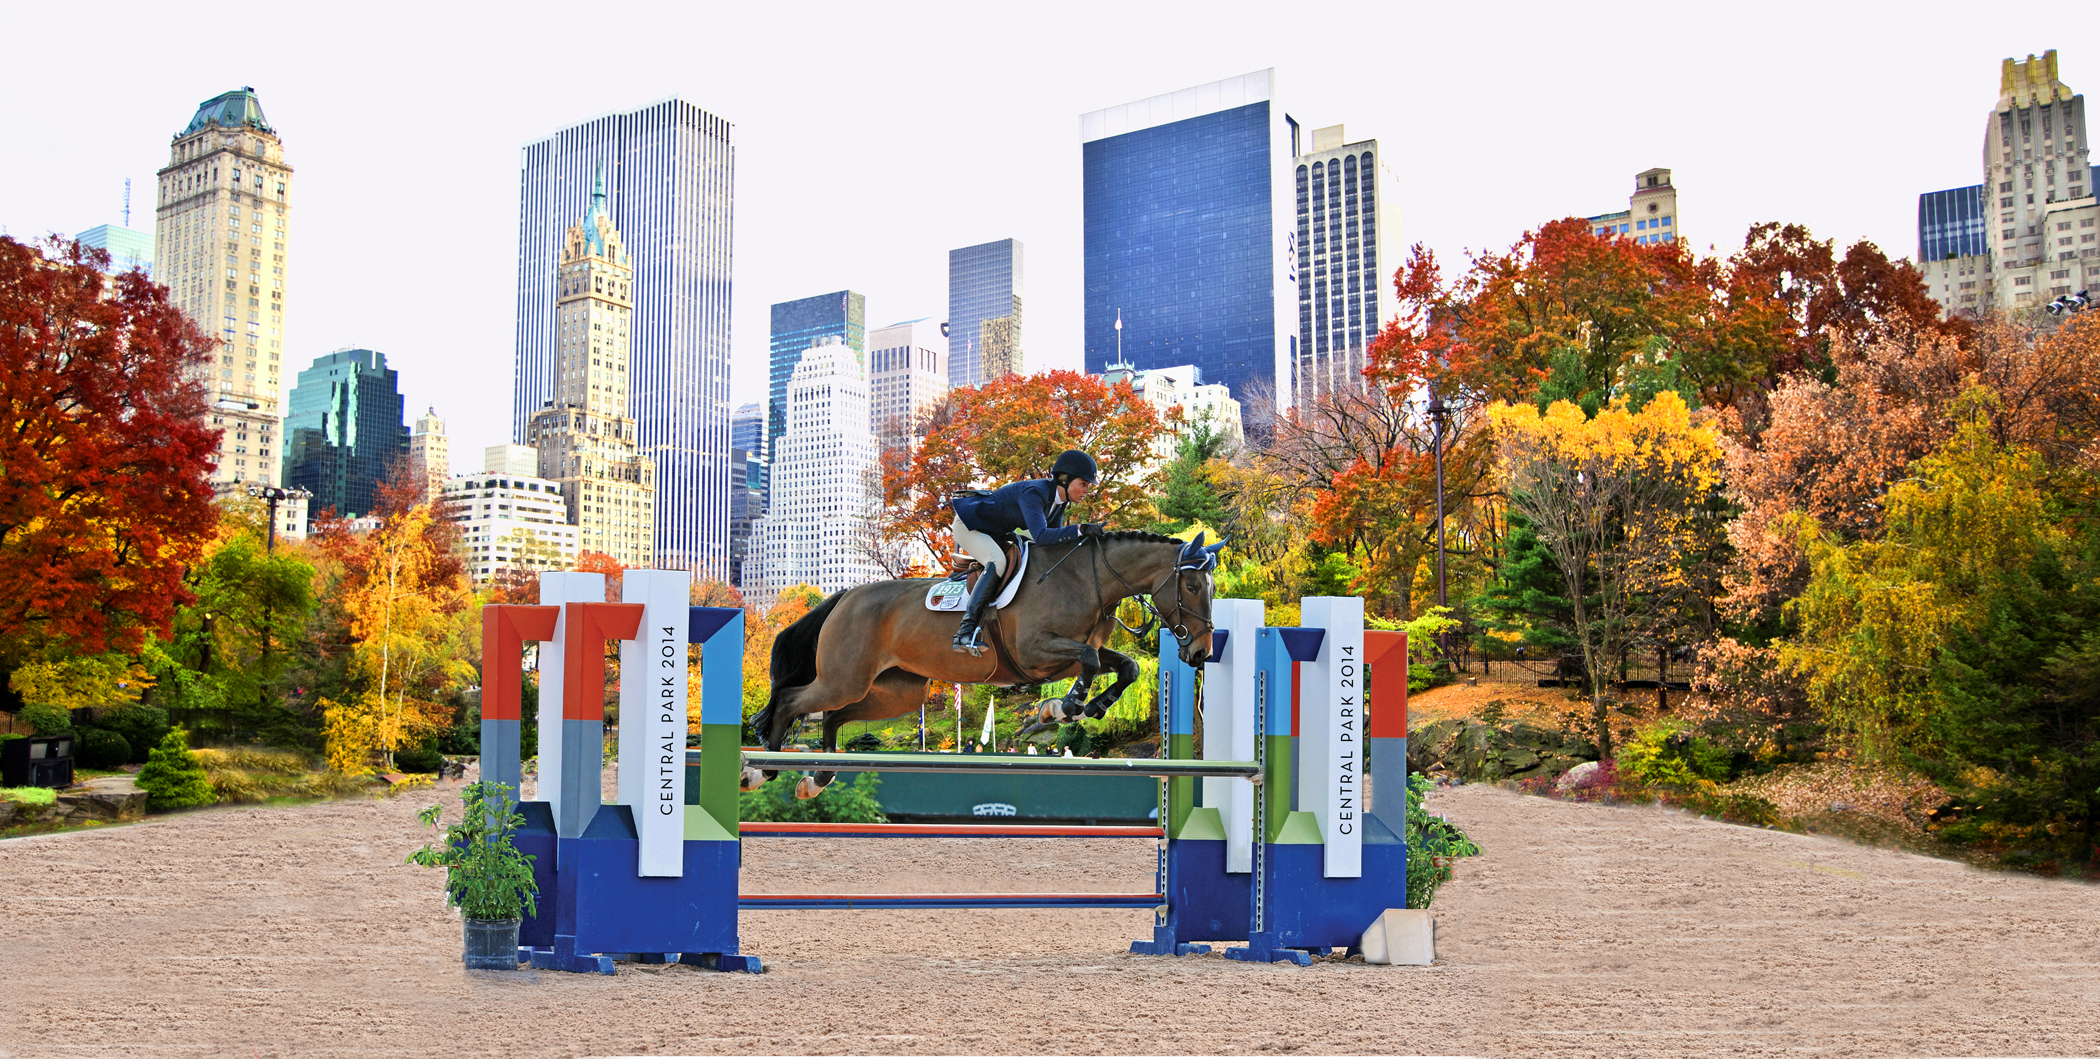 Family Day At The Rolex Central Park Horse Show